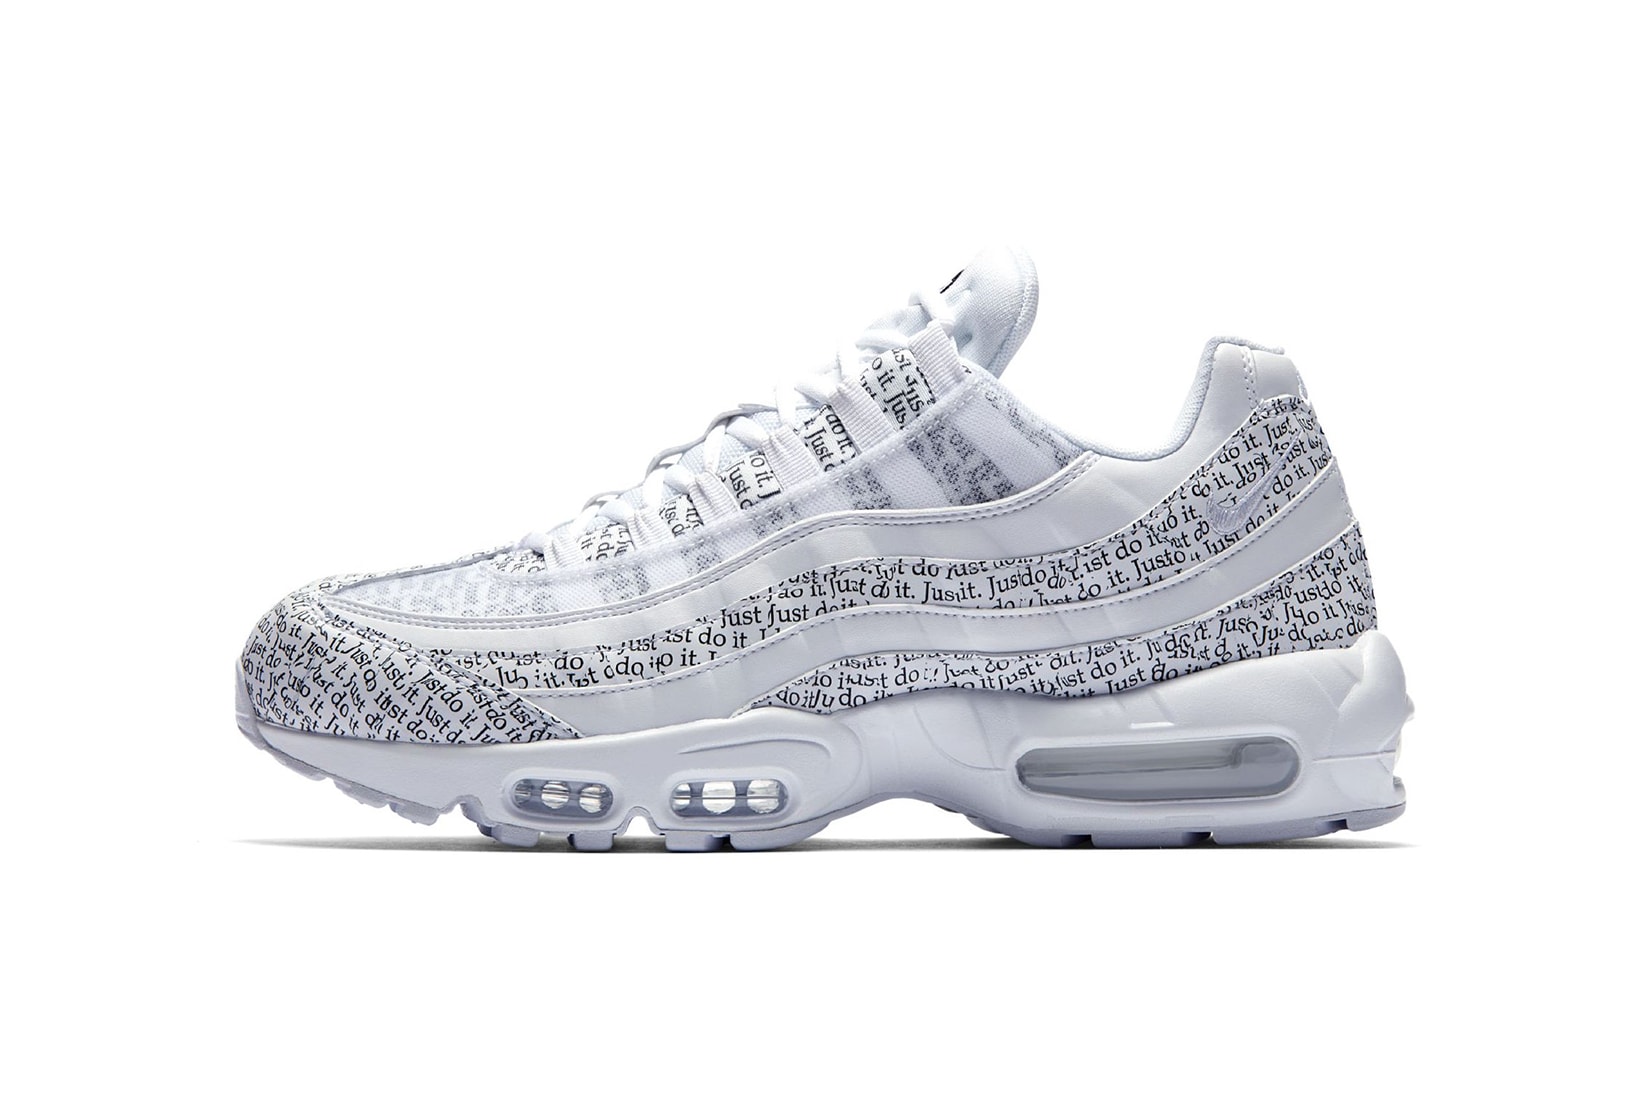 Nike Air Max 95 Just Do It White 2018 release date info drop sneakers shoes footwear